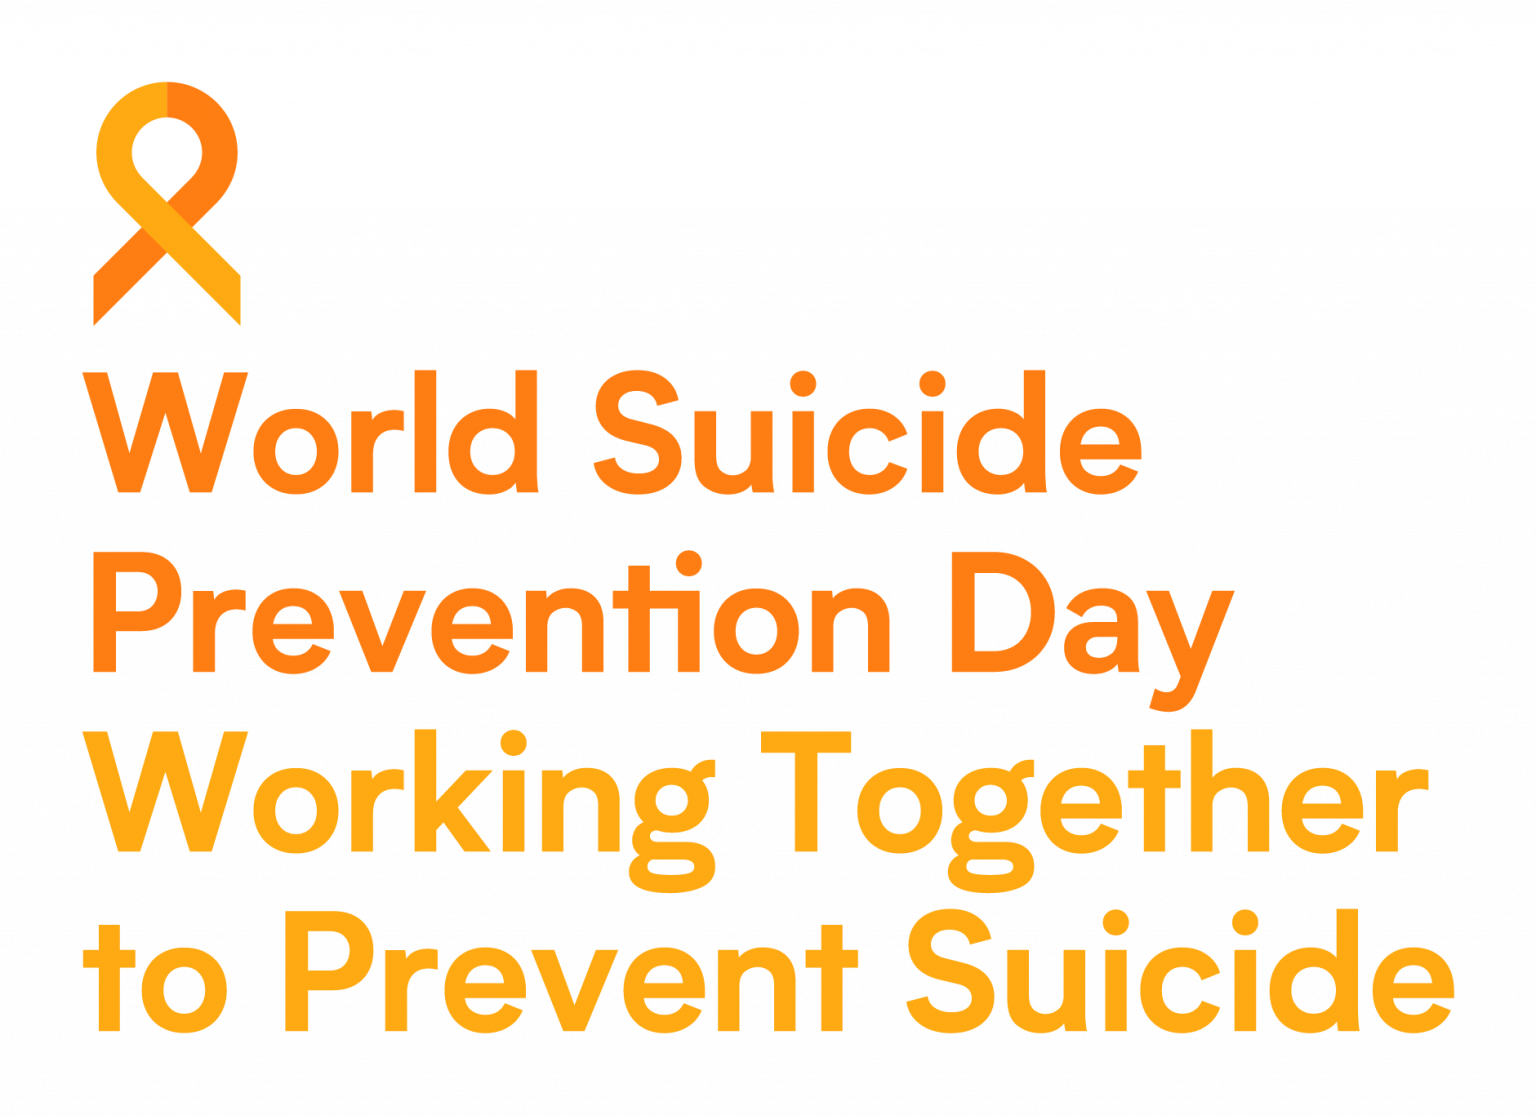 World Suicide Prevention Day 2020 Iasp